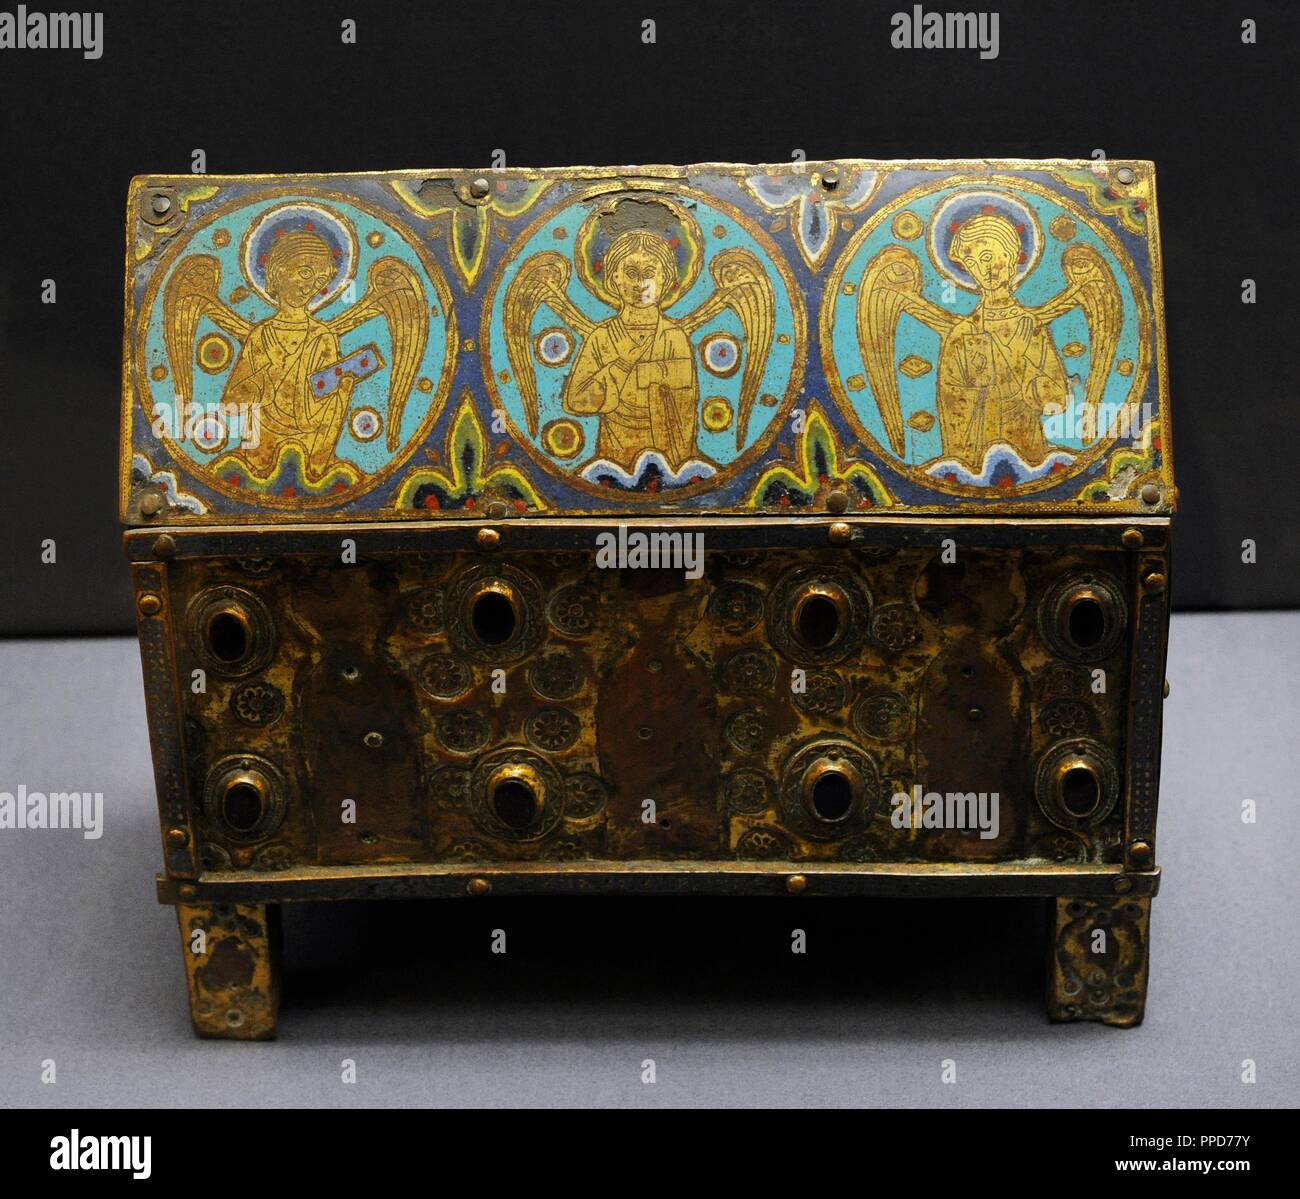 Small chasse with angels in medallions. Limoges, c. 1200-1210. Copper with enamel on oak. Museum Schnu tgen. Cologne, Germany. Stock Photo